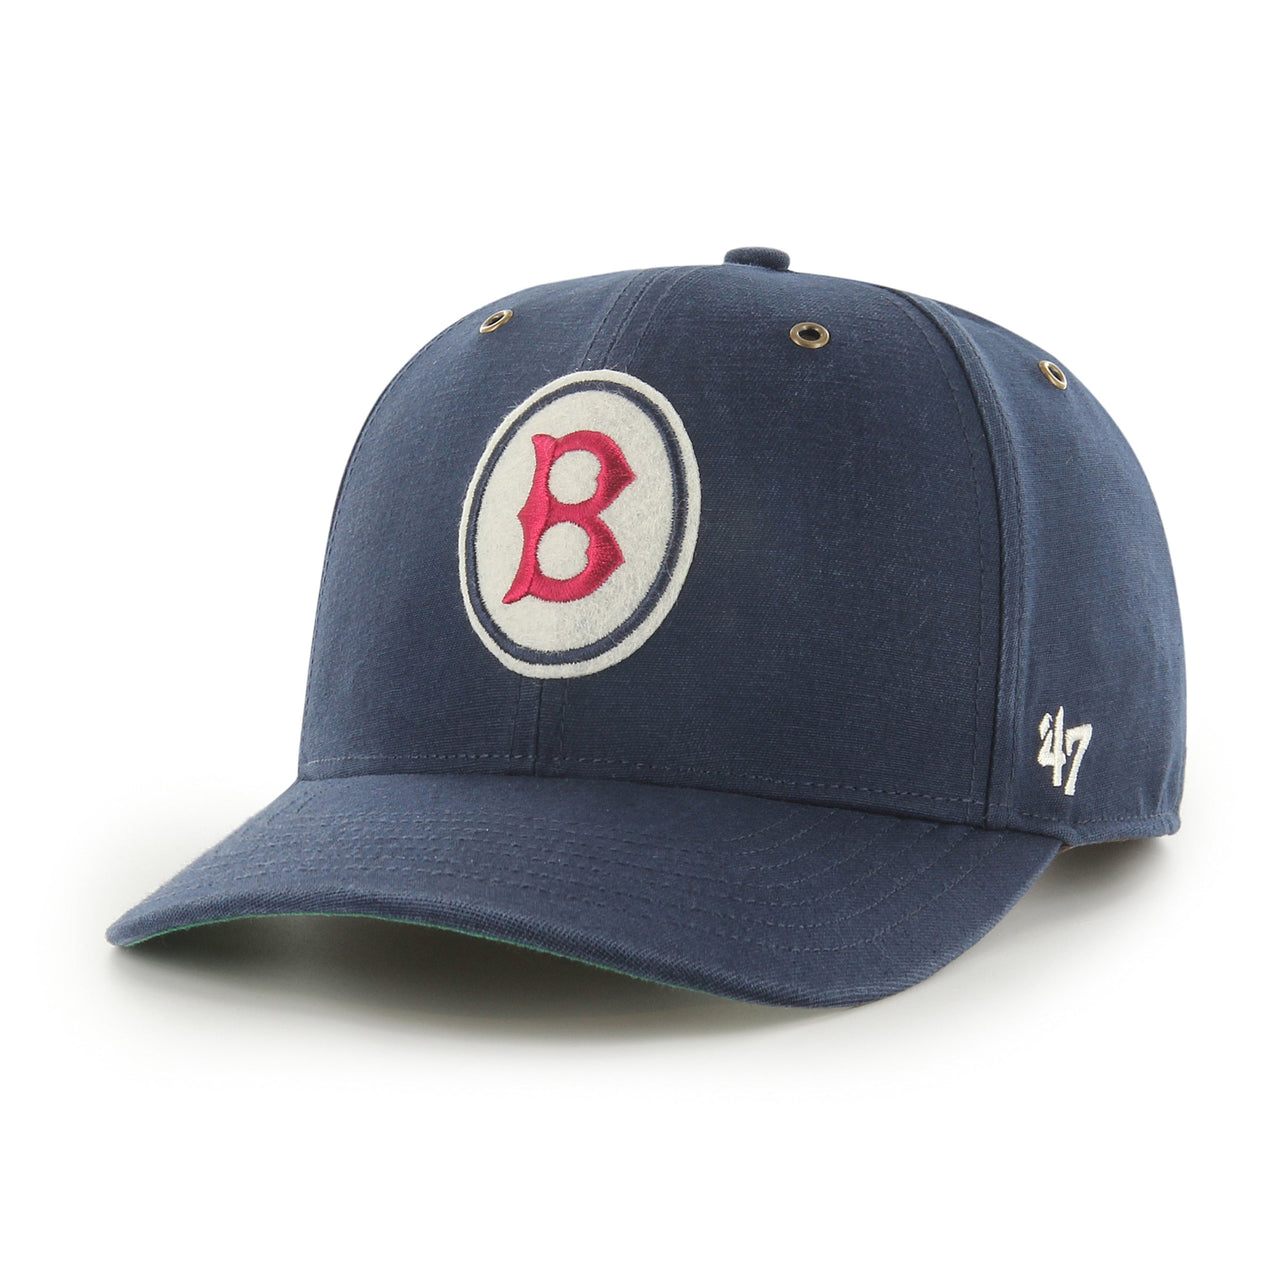 The Cooperstown Boston Red Sox Felt Red Sox Logo Snapback Hat | Navy Snapback Cap